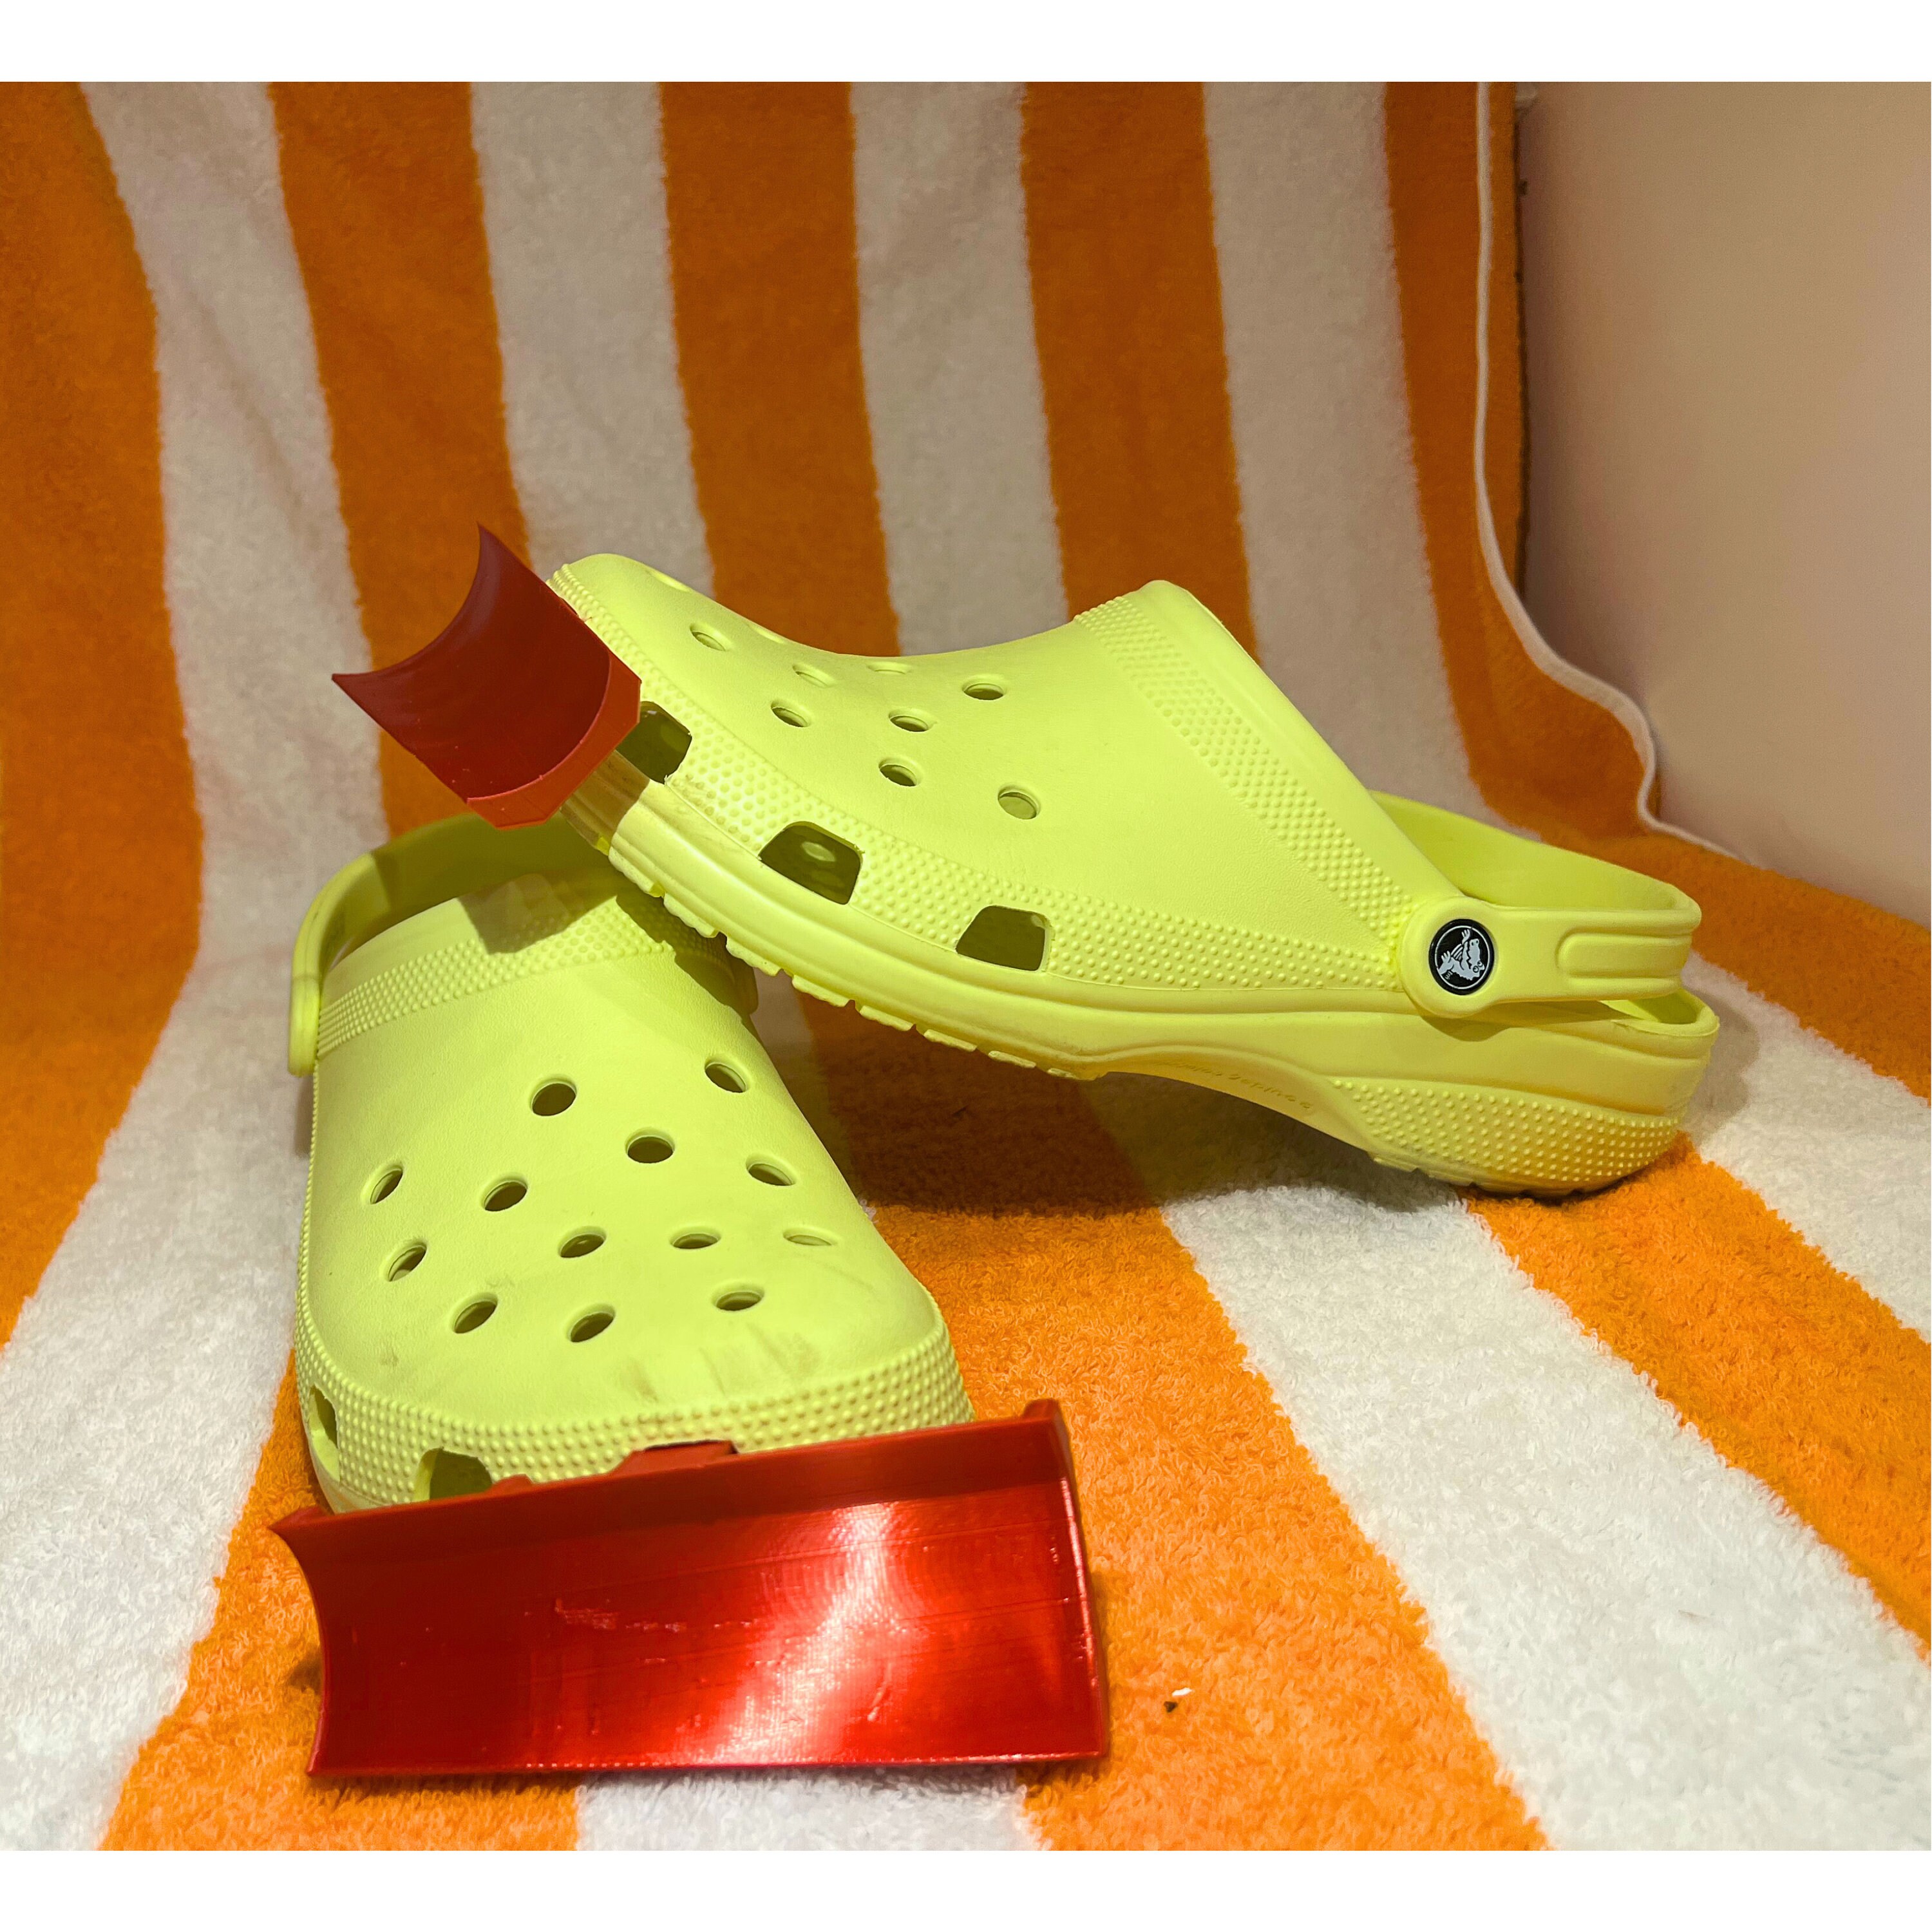 CROC Snow/ Sand PLOWS PCK 2 for Both Left and Right Croc Plow 3D Printed  Multi-color Option 